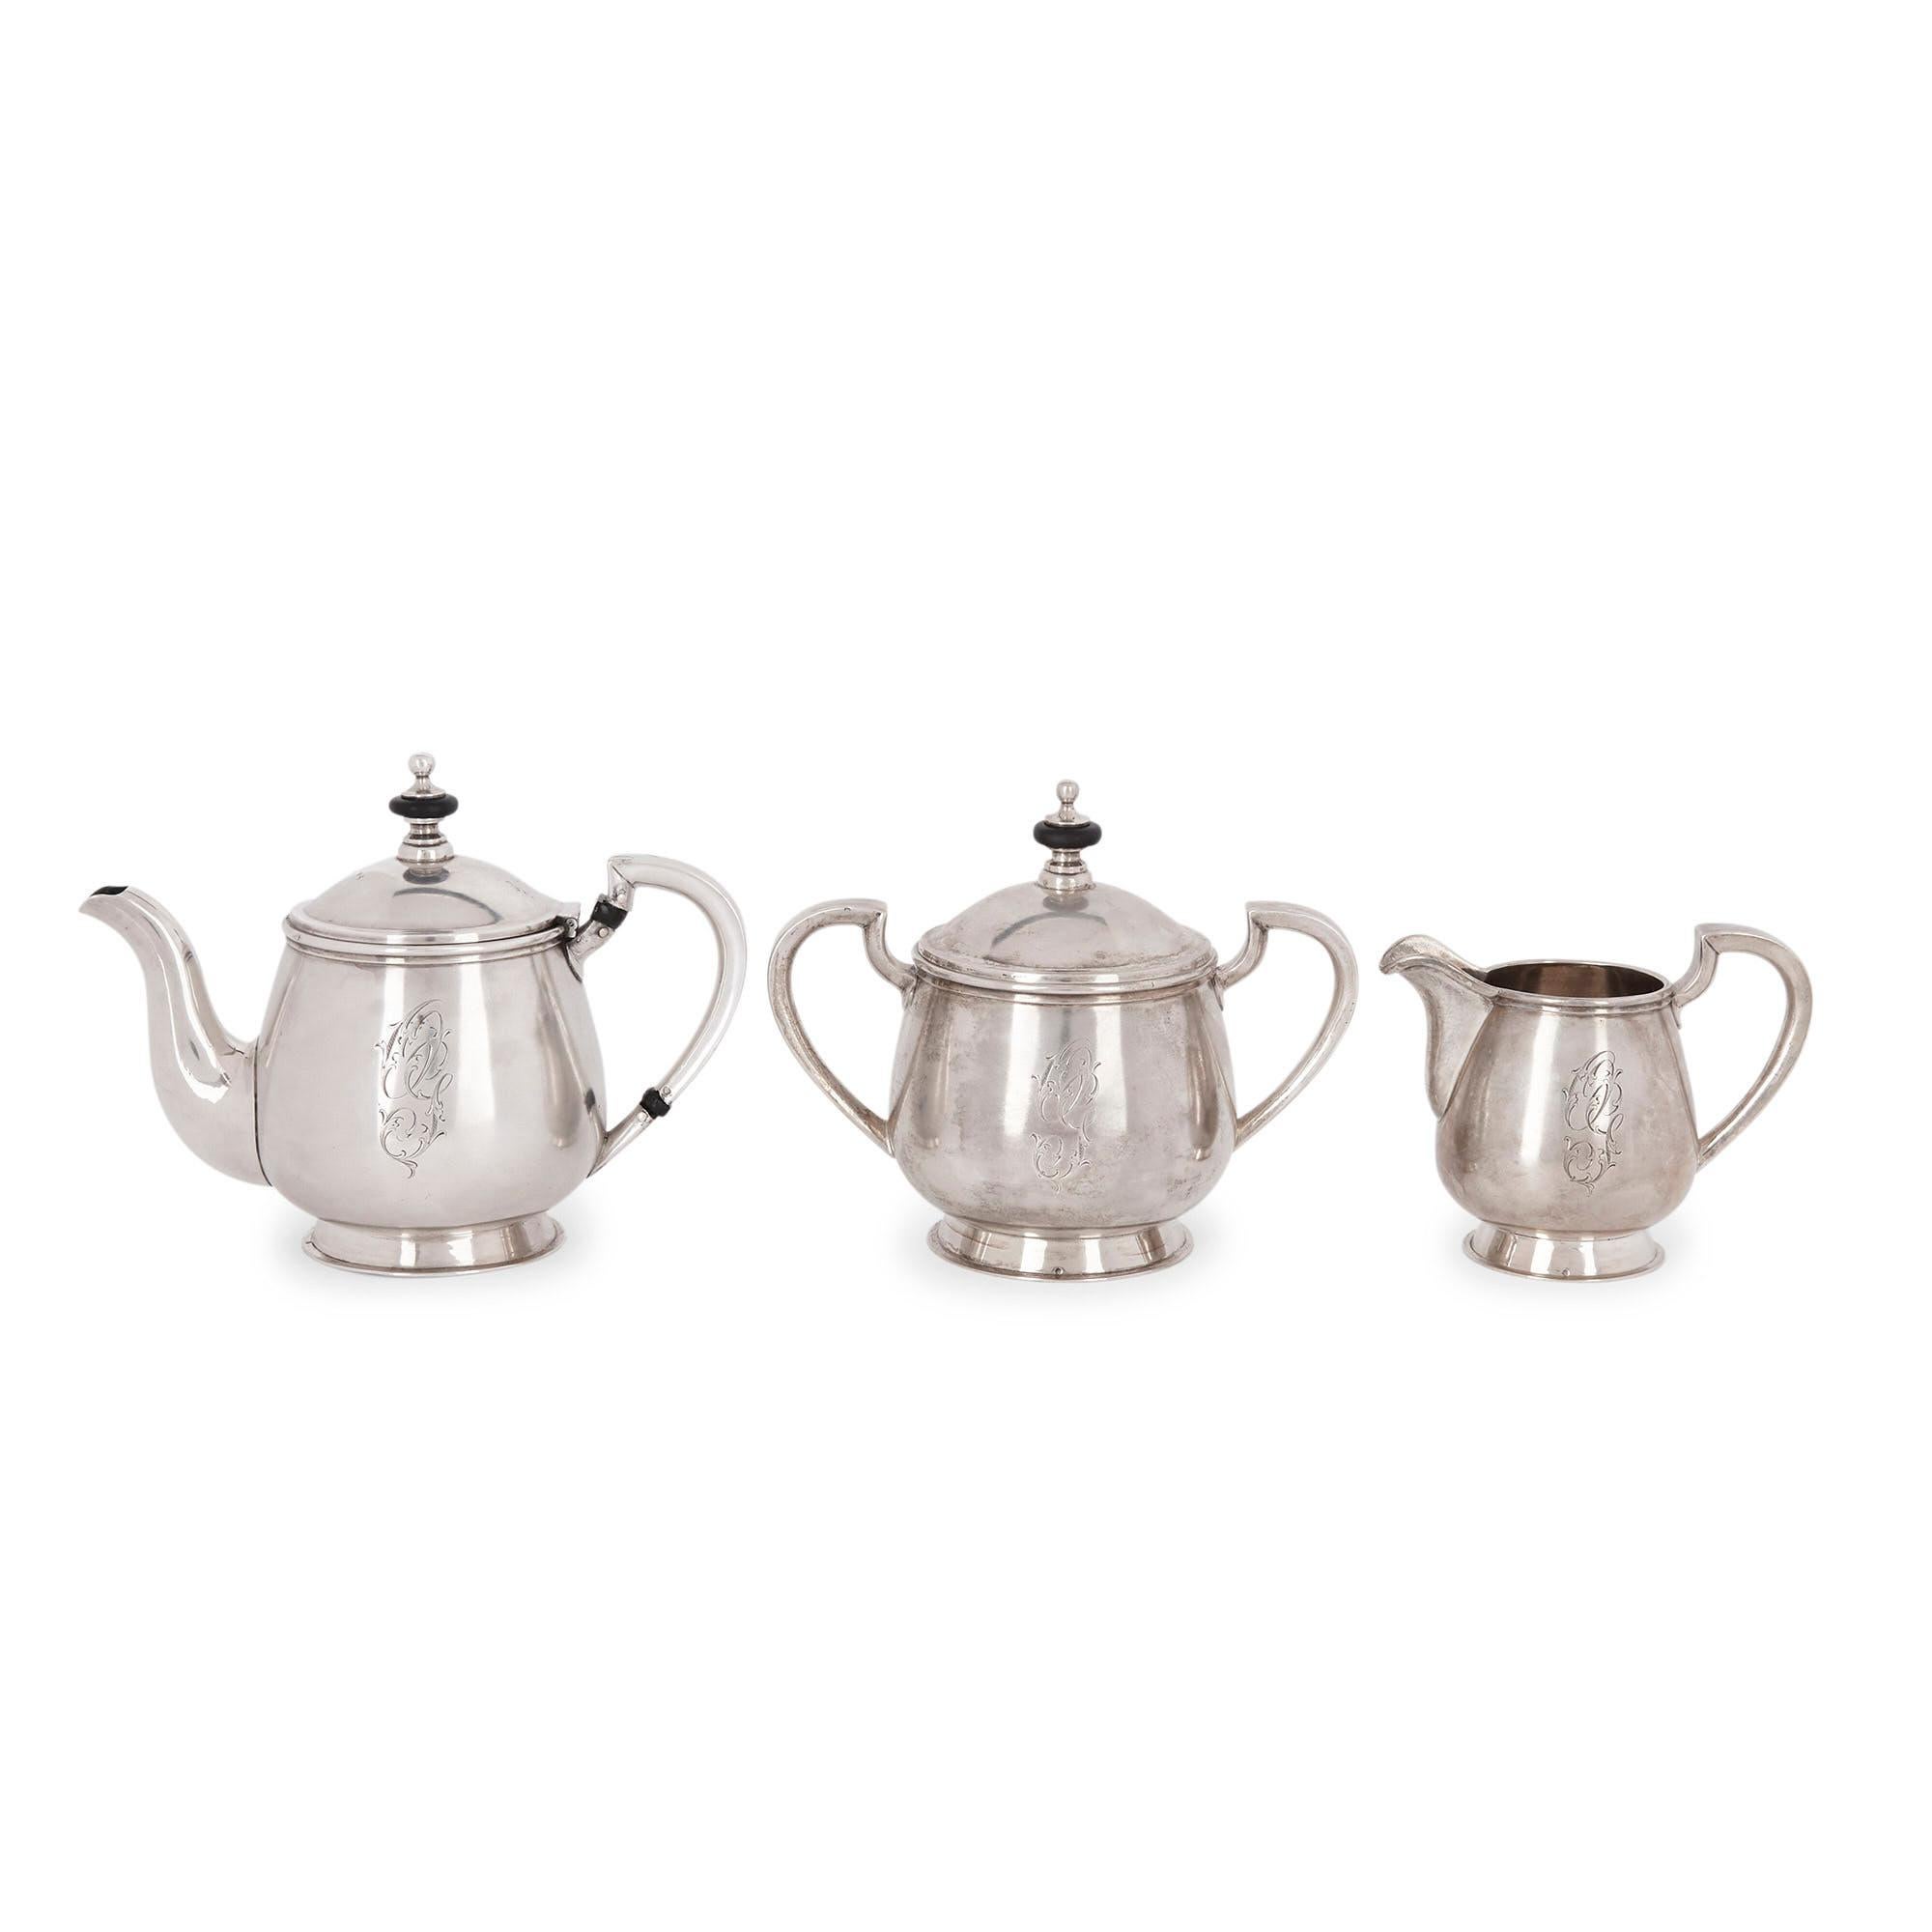 Russian neoclassical style silver tea service
Russian, circa 1900
Teapot: Height 14cm, width 17cm, depth 9cm
Creamer: Height 9cm, width 11cm, depth 7cm

This superb set is crafted from fine silver in the elegant Russian Neoclassical style. The